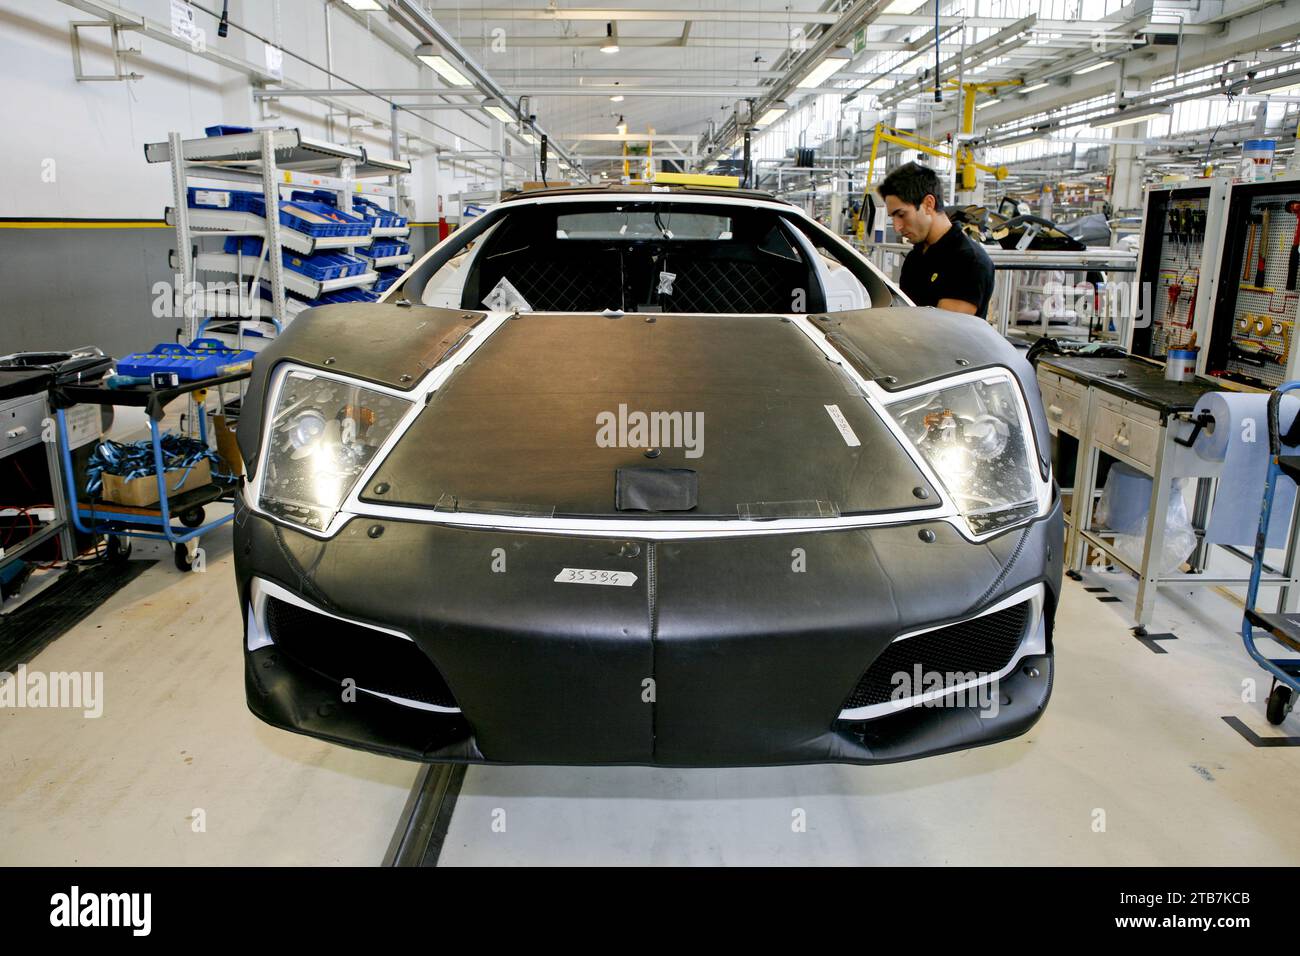 Italy, Sant'Agata Bolognese, Automobili Lamborghini’s factory, 2008/10/10: workers at work on the Murcielago LP640-4 assembly line, the brand's first Stock Photo